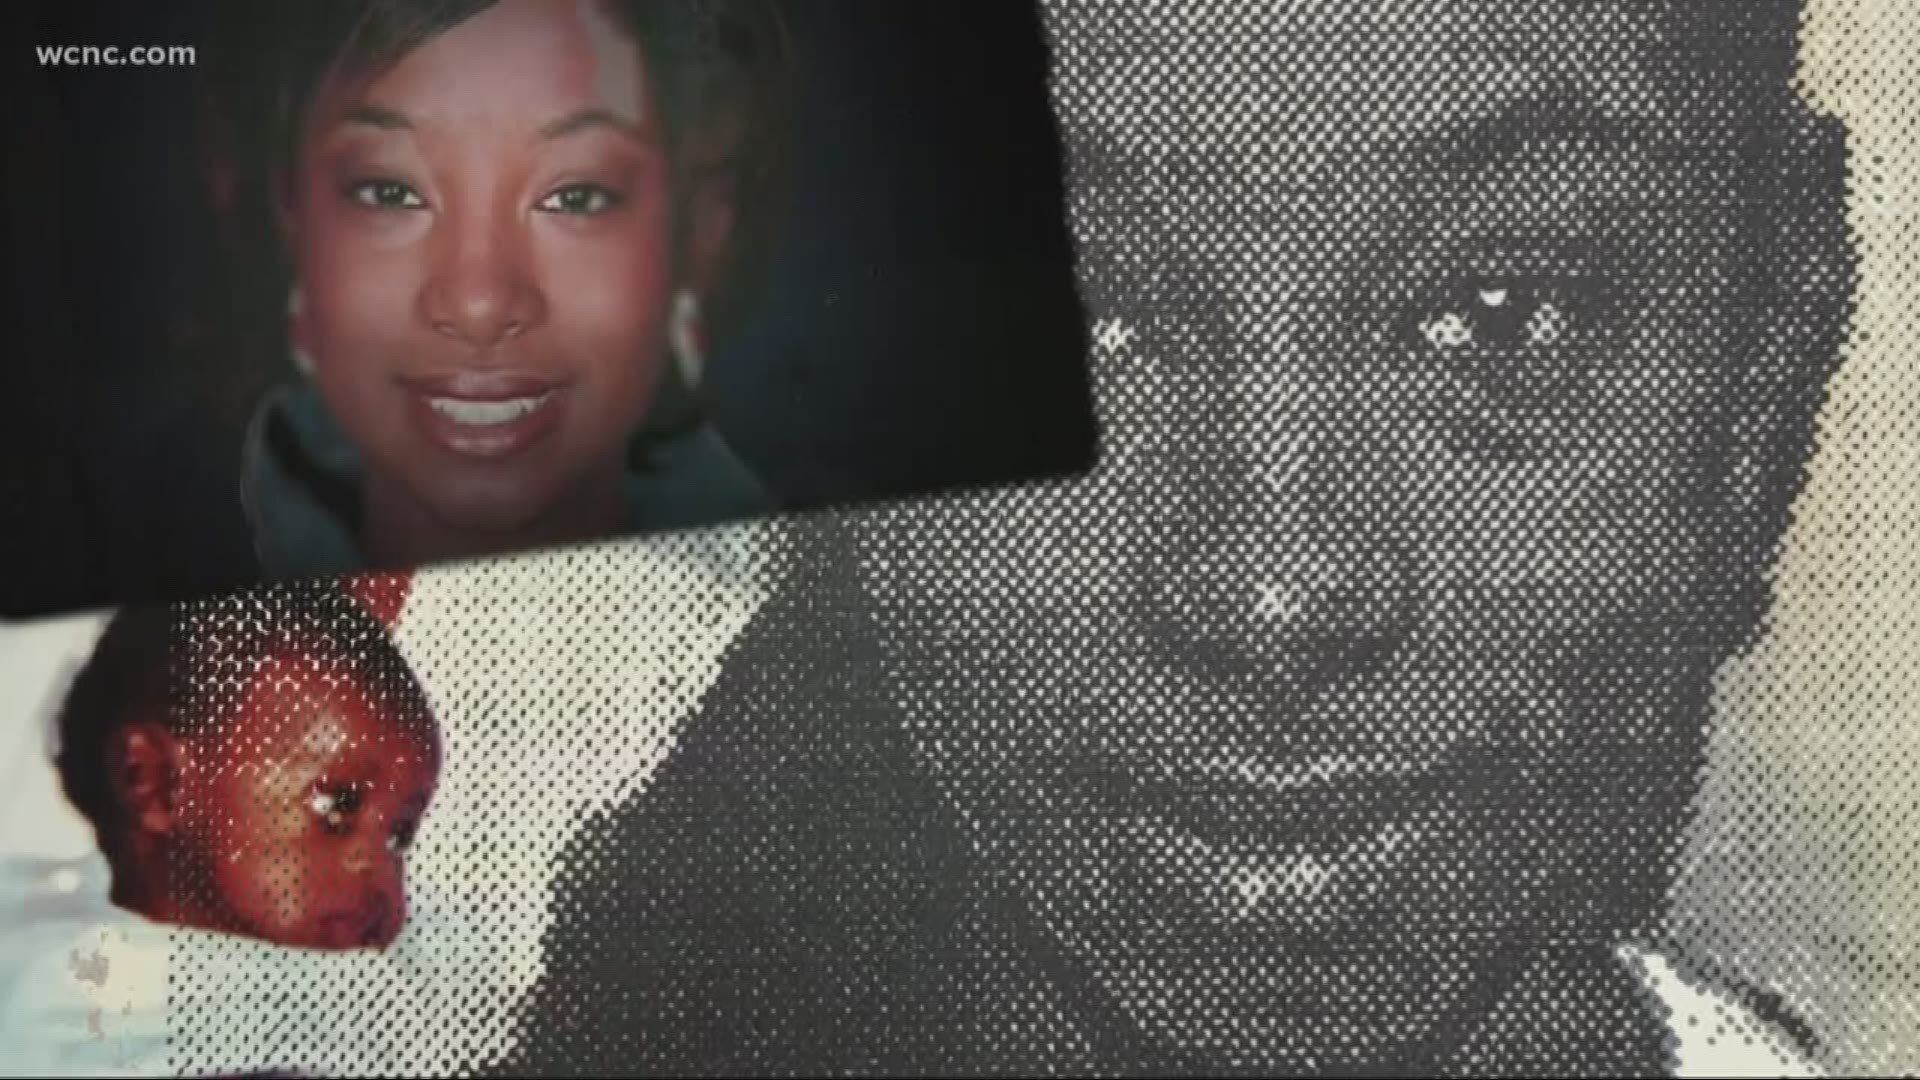 Alkia Rodgers left to meet her baby's father for diapers 16 years ago. She was found murdered just steps away from her family's home in south Charlotte.